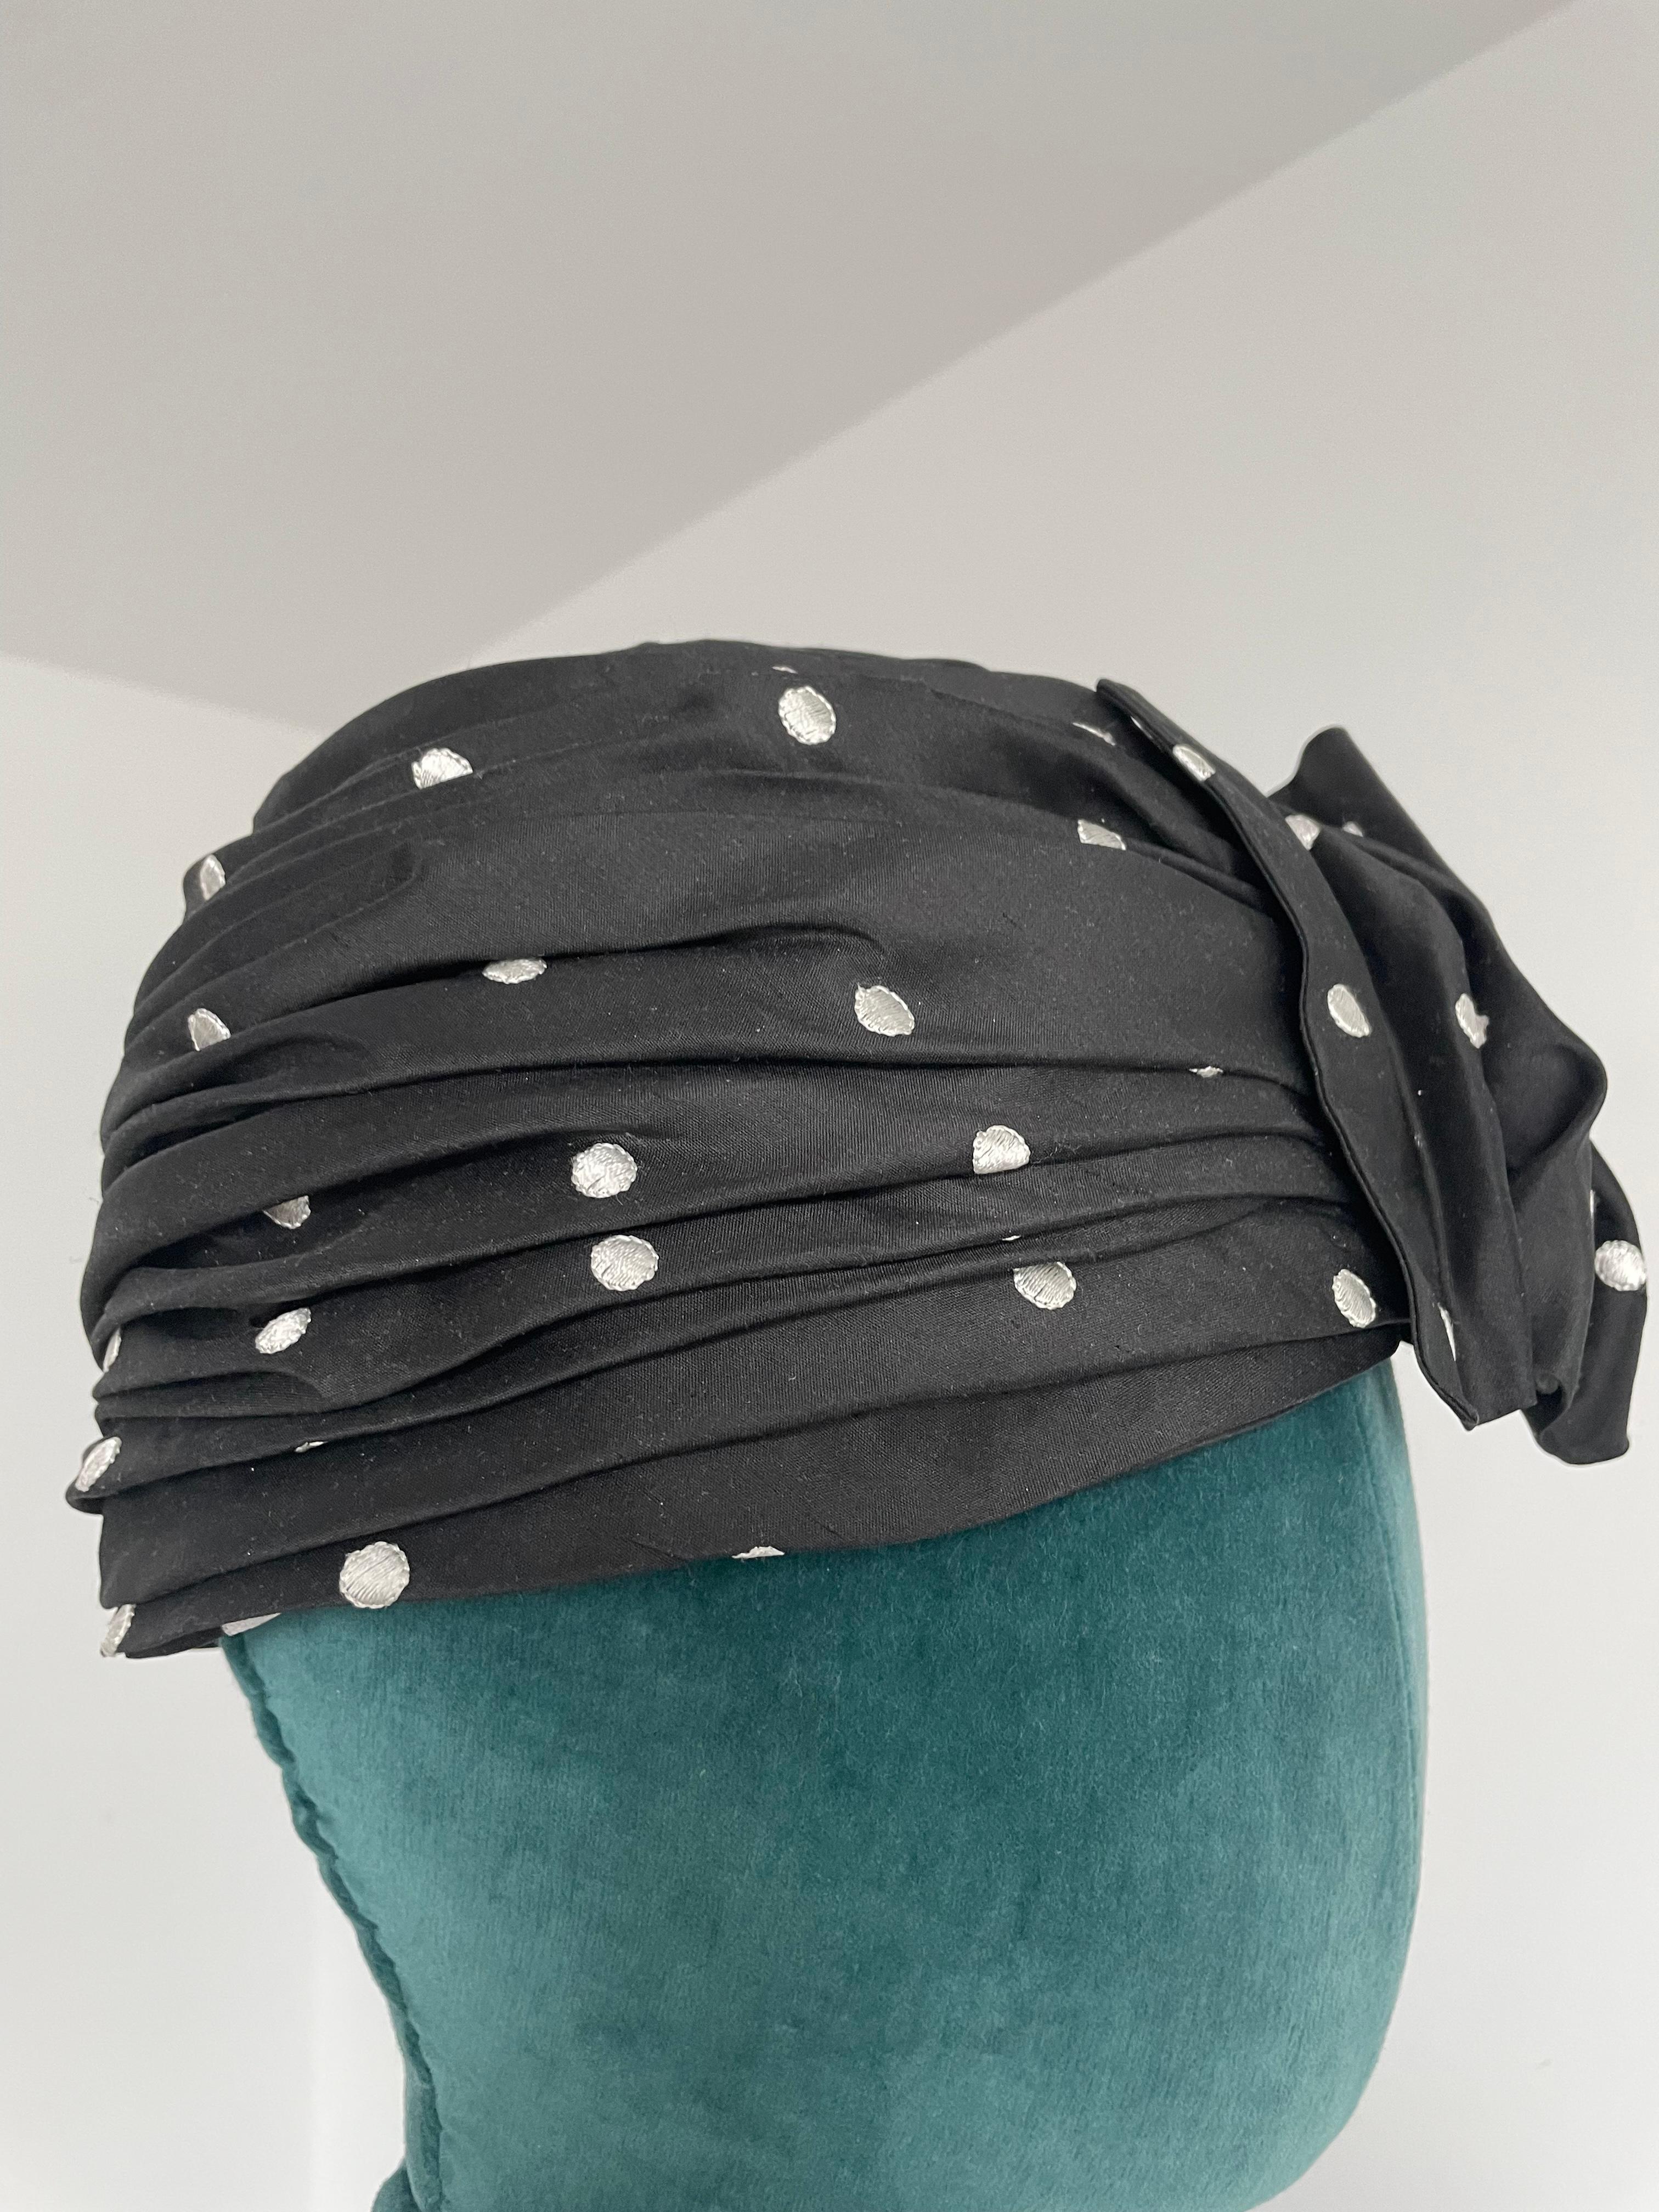 Add a touch of timeless elegance to your headwear collection with the Maison Michel Polka Dot Fabric Hat. This chic and sophisticated hat is perfect for adding a fashionable flair to any outfit, whether you're attending a formal event or enjoying a